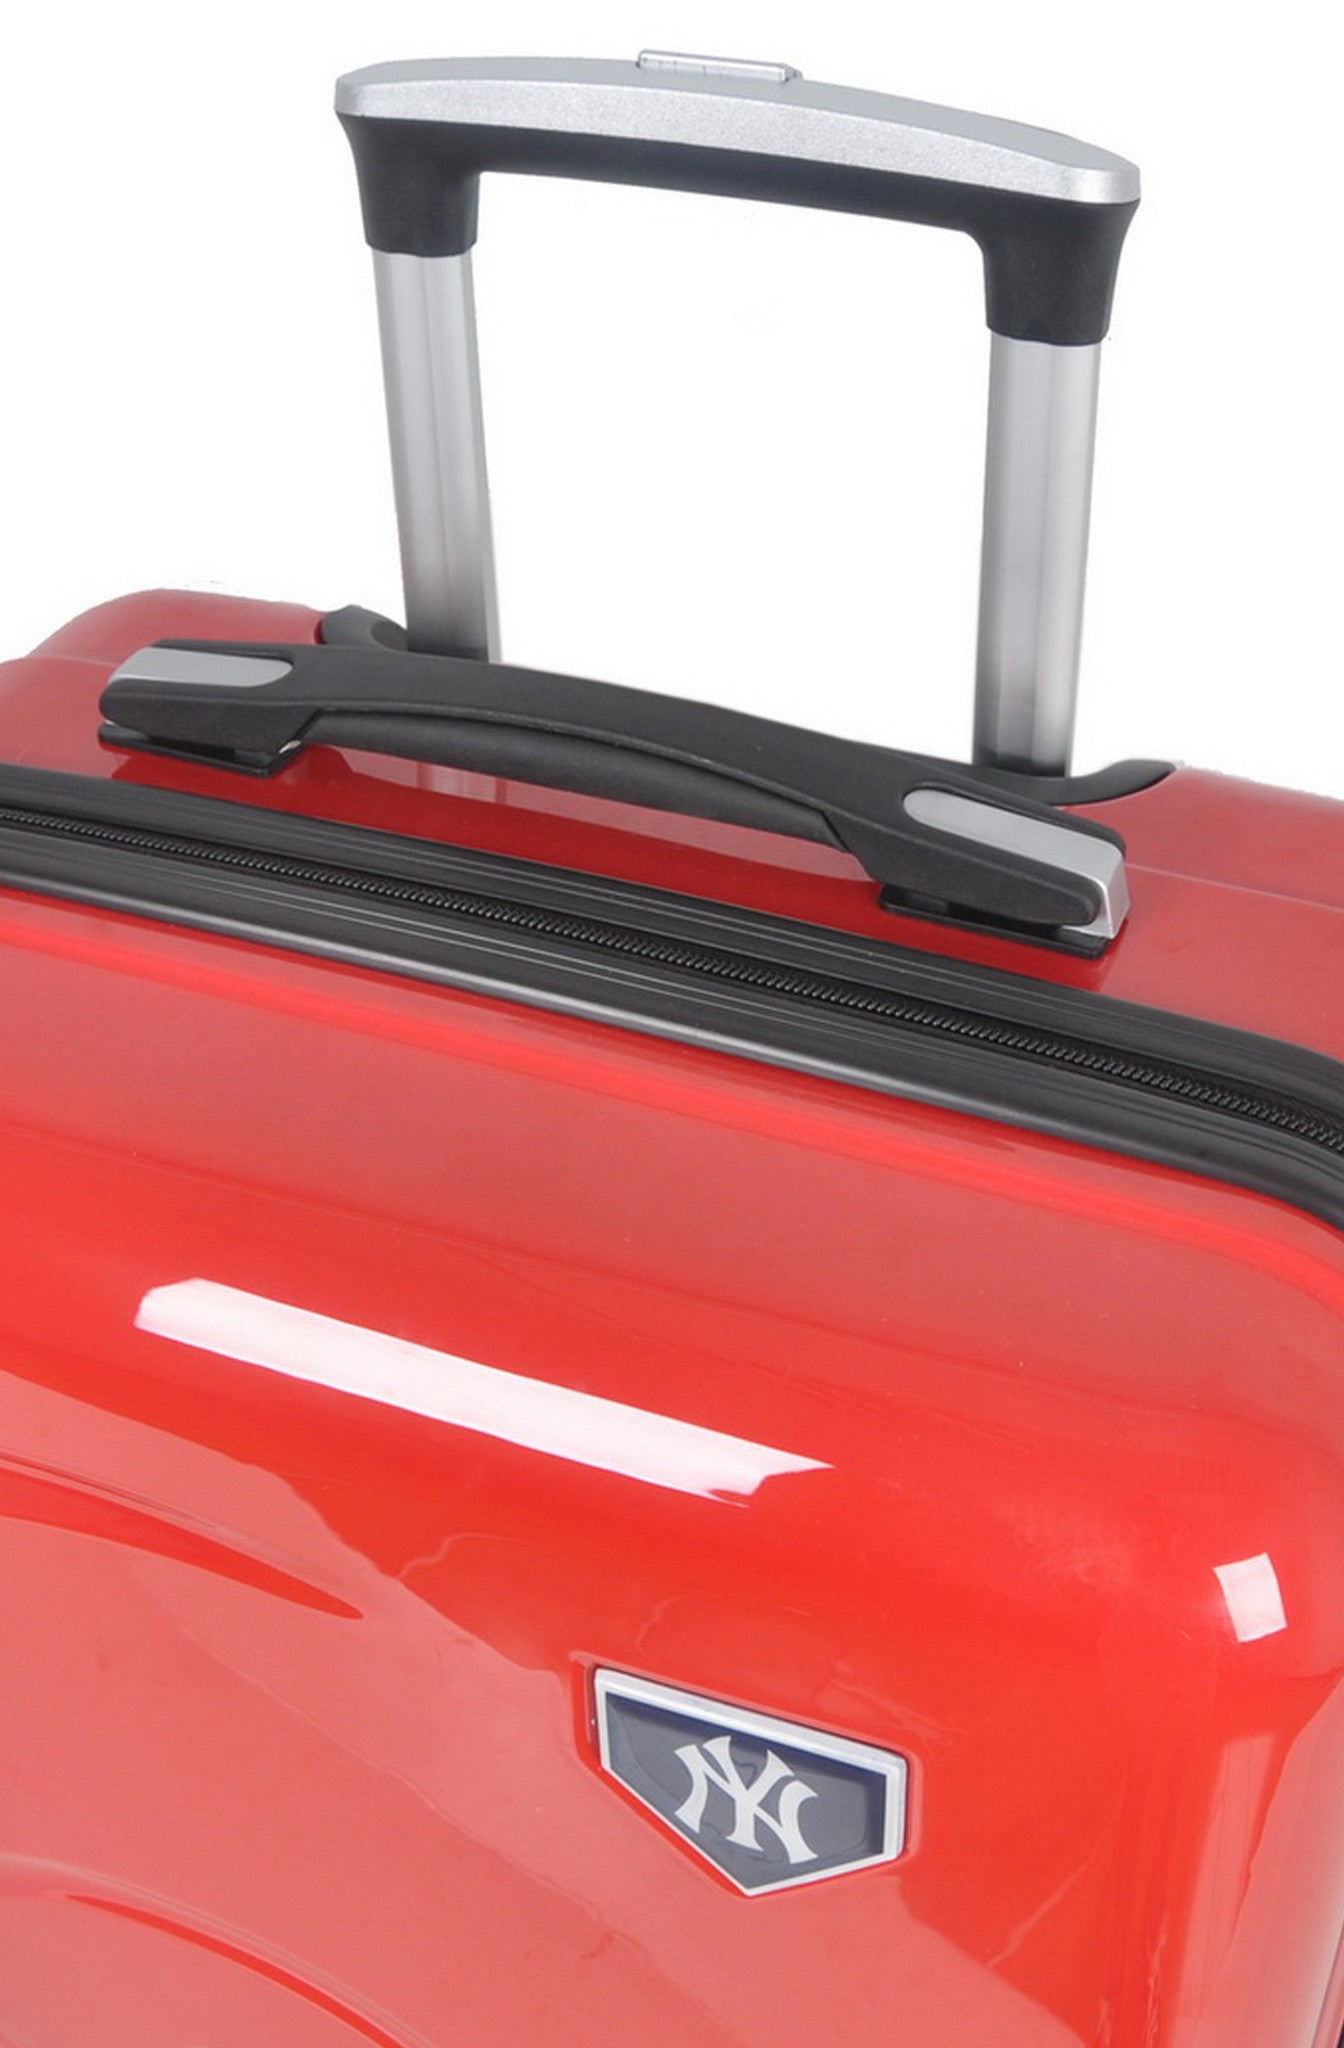 Boston Red Sox, 19" Premium Molded Luggage by Kaybull #BOS-19PCF-IFD - OBM Distribution, Inc.